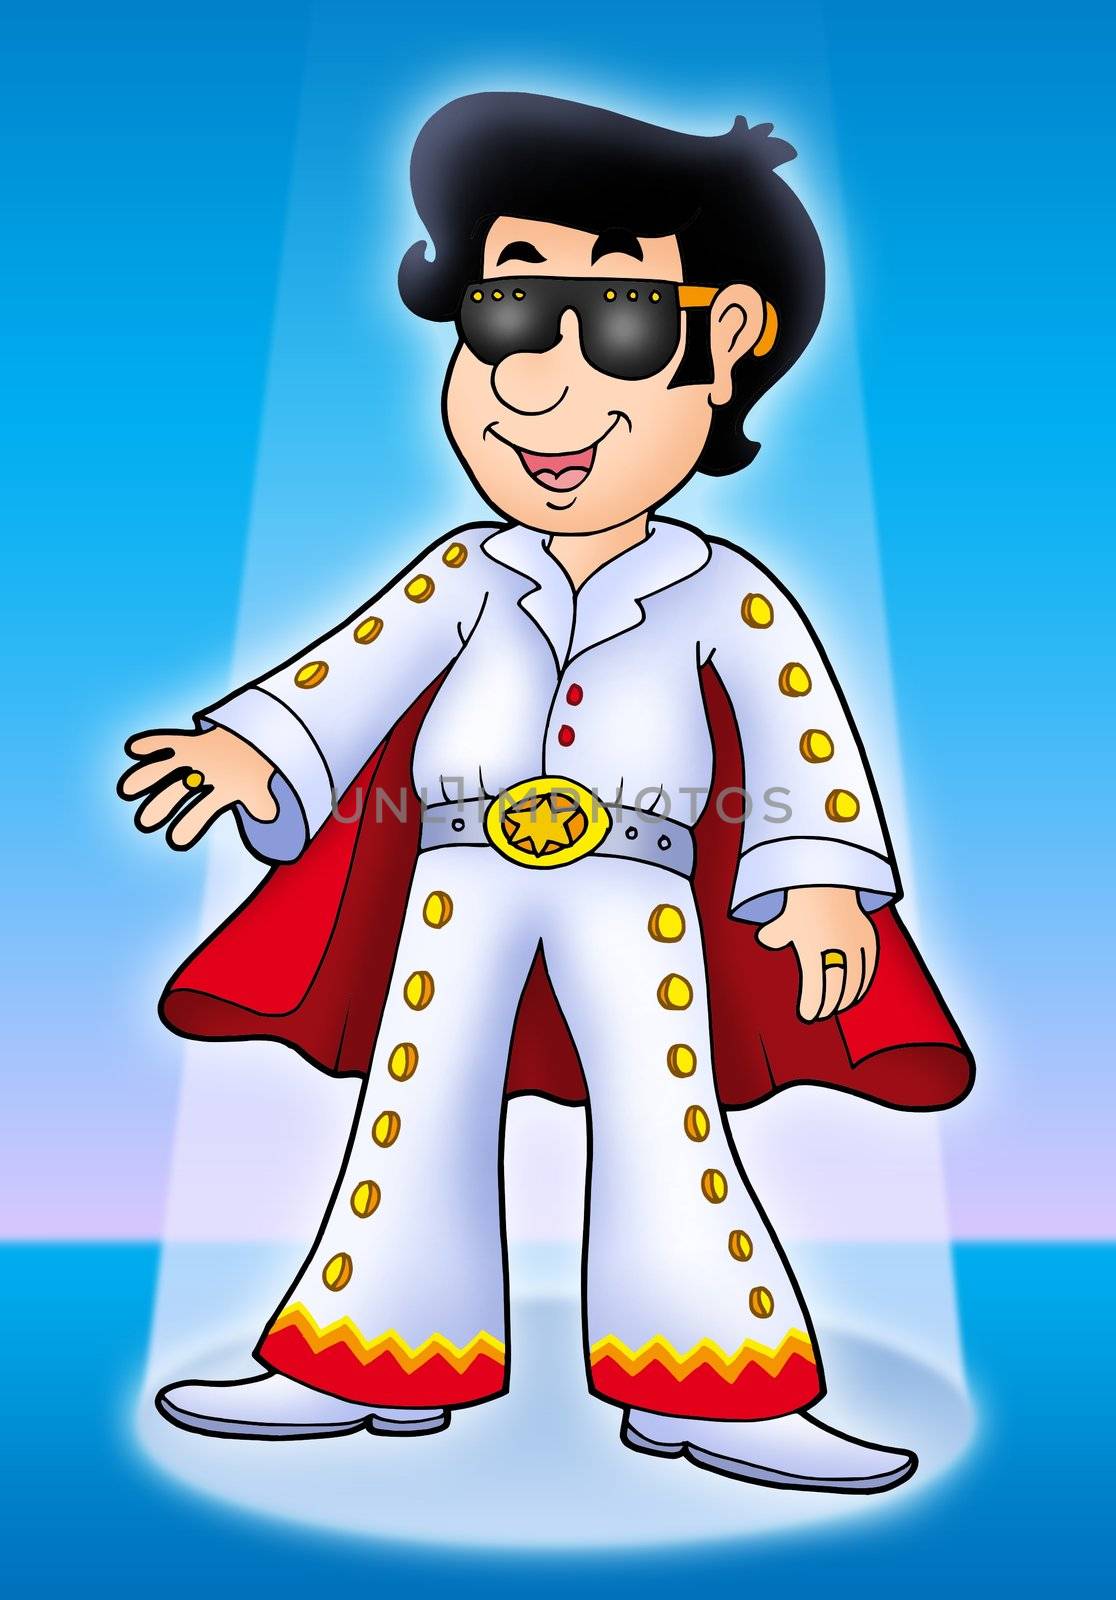 Cartoon Elvis impersonator on stage by clairev